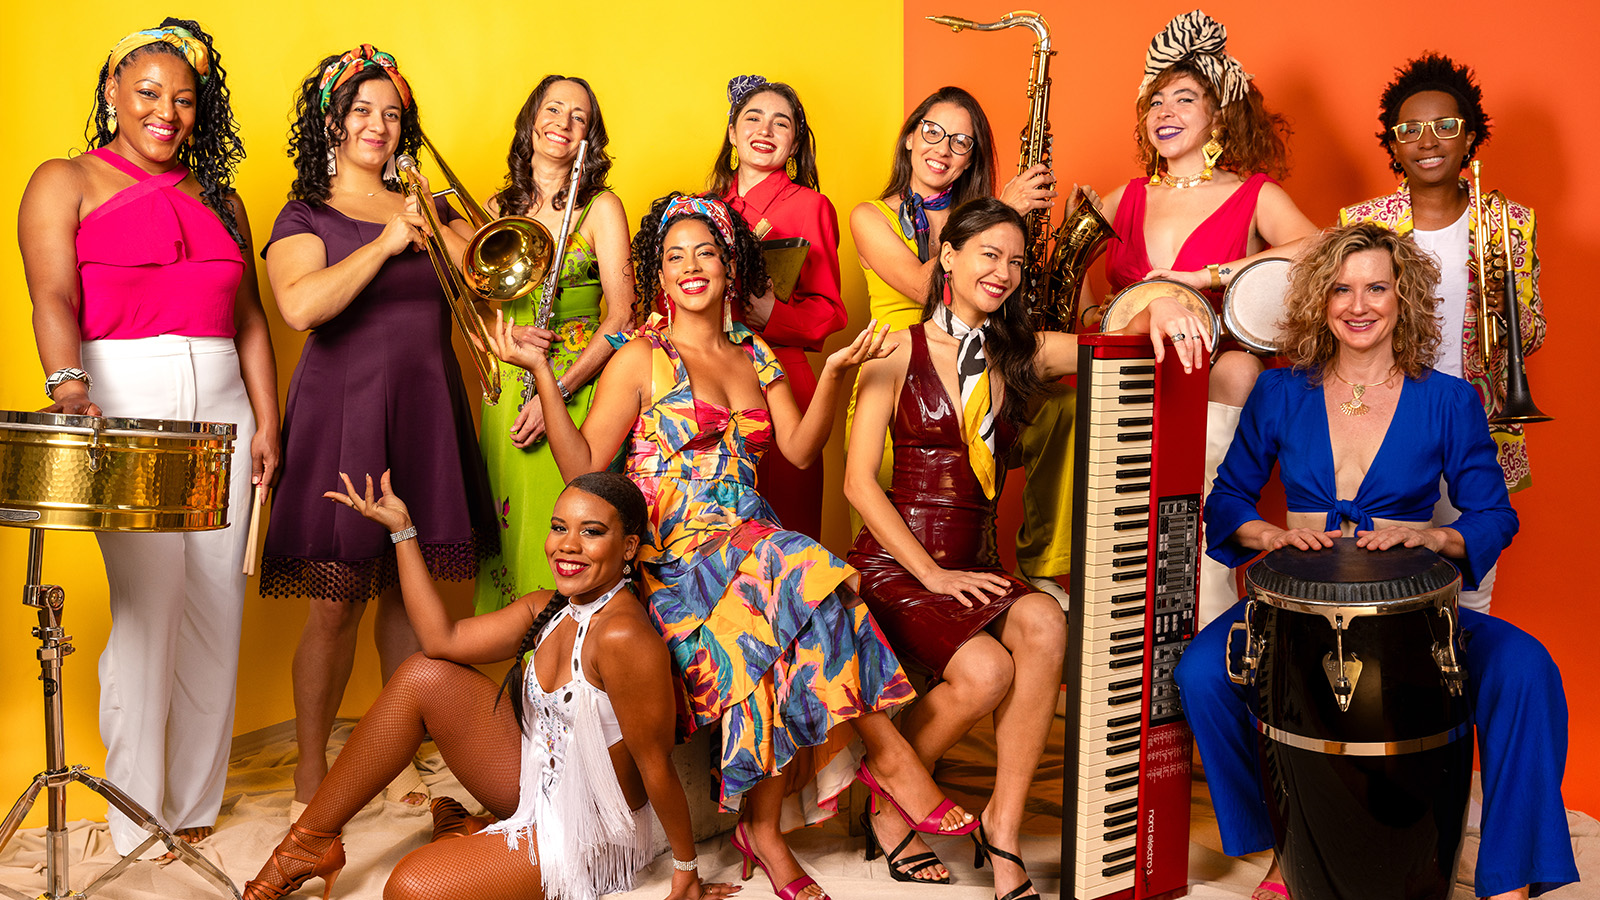 A group of 11 women pose with their instruments in colorful clothes infront of a yellow and orange background